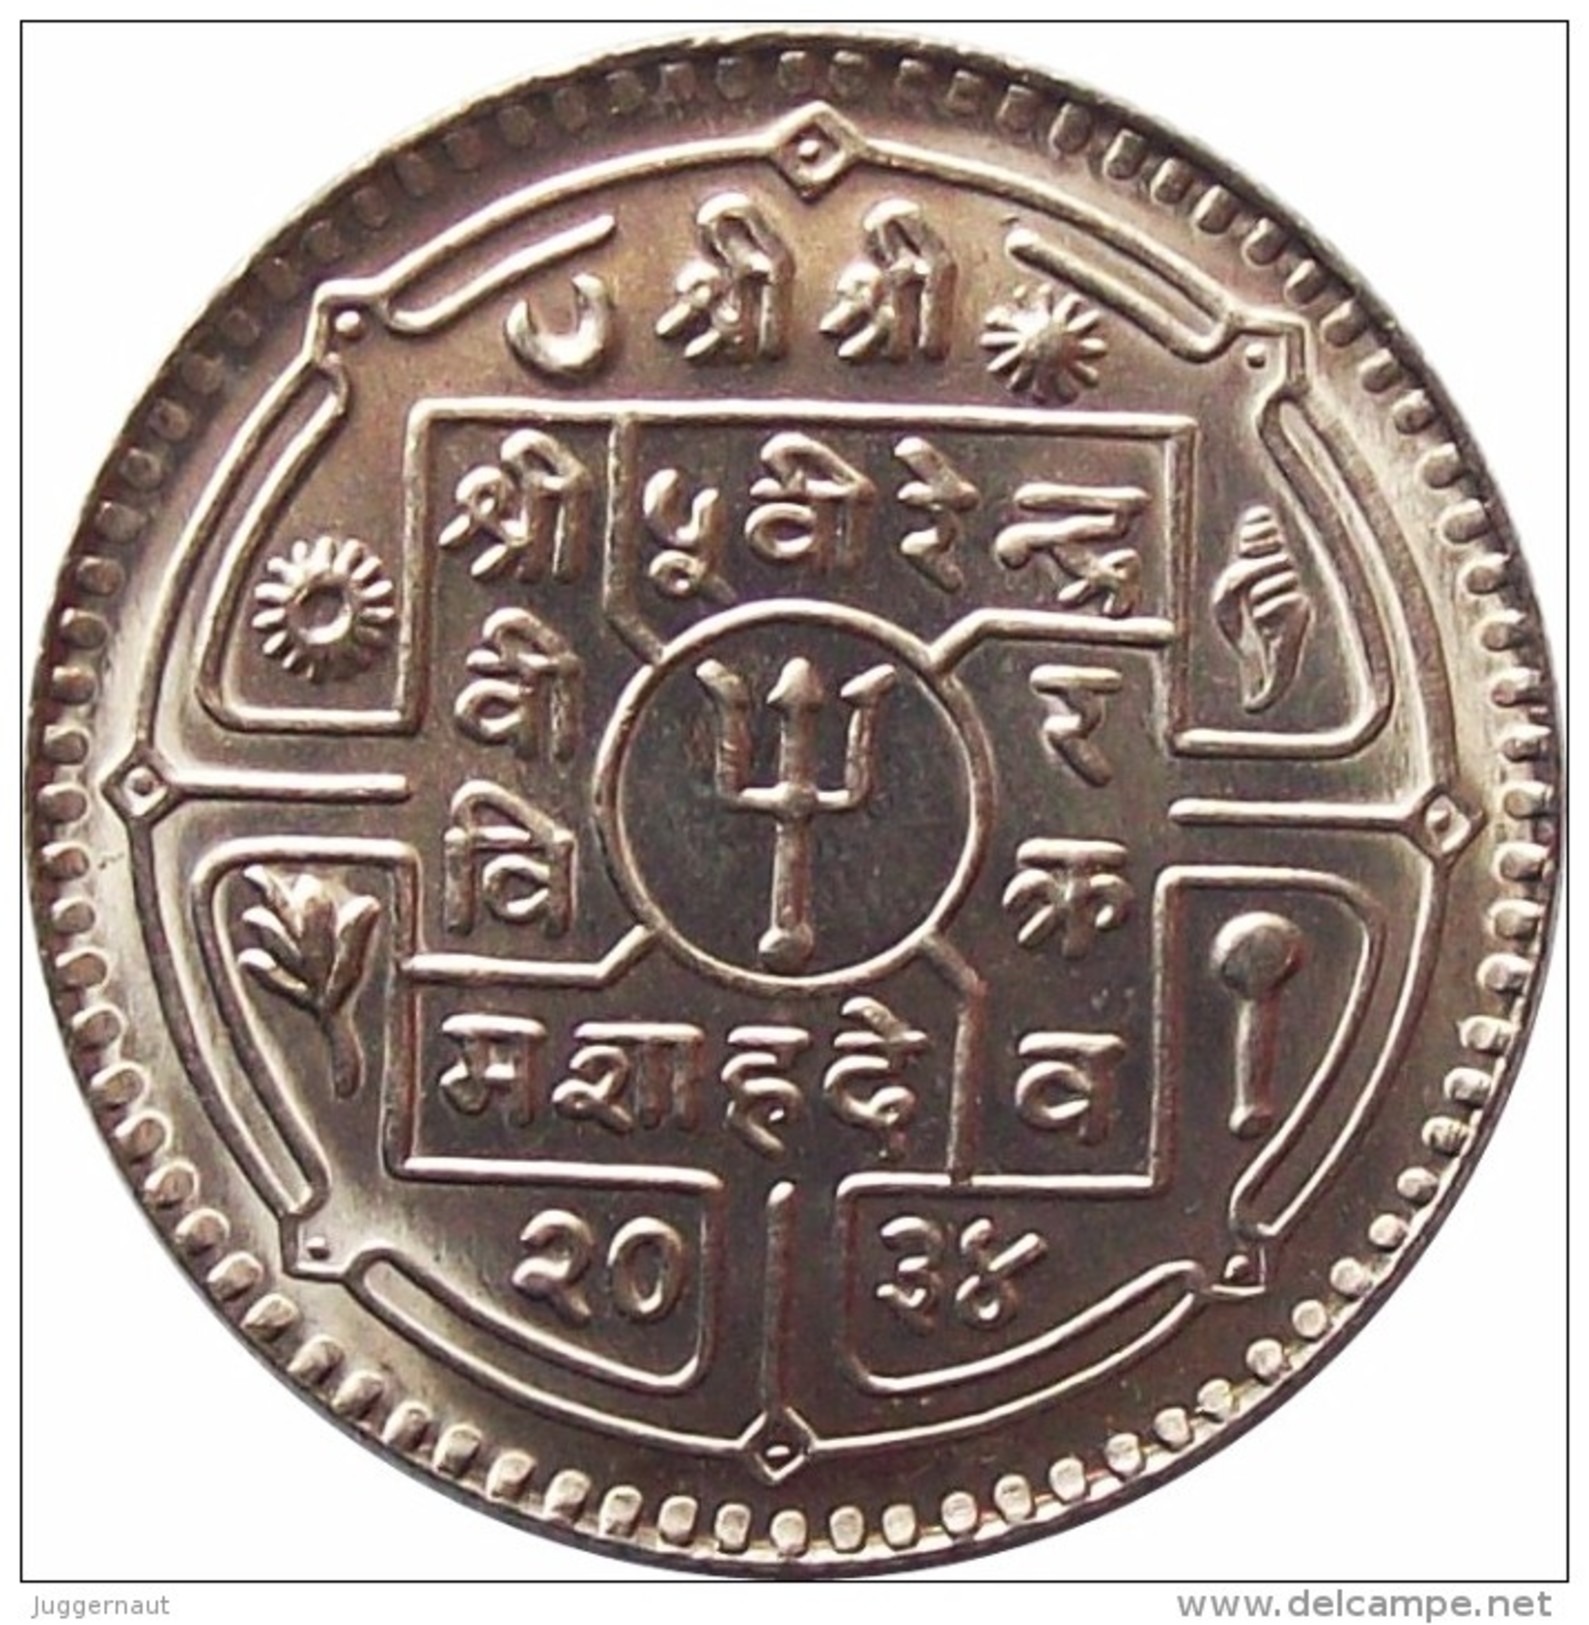 NEPAL ONE RUPEE COPPER-NICKEL COIN KING BIRENDRA 1979 AD KM-828a UNC UNCIRCULATED - Népal